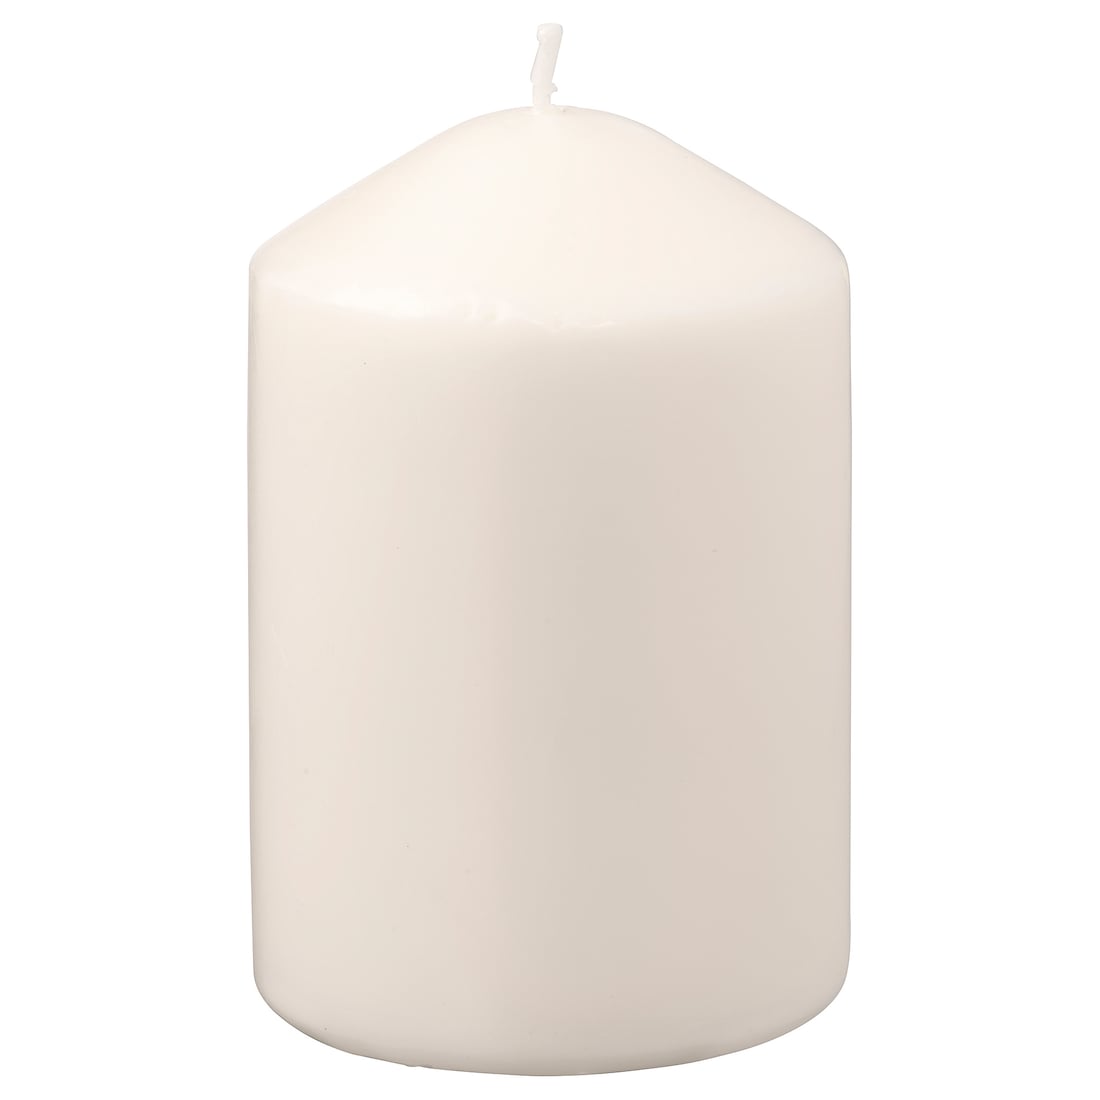 Unscented Block Candle